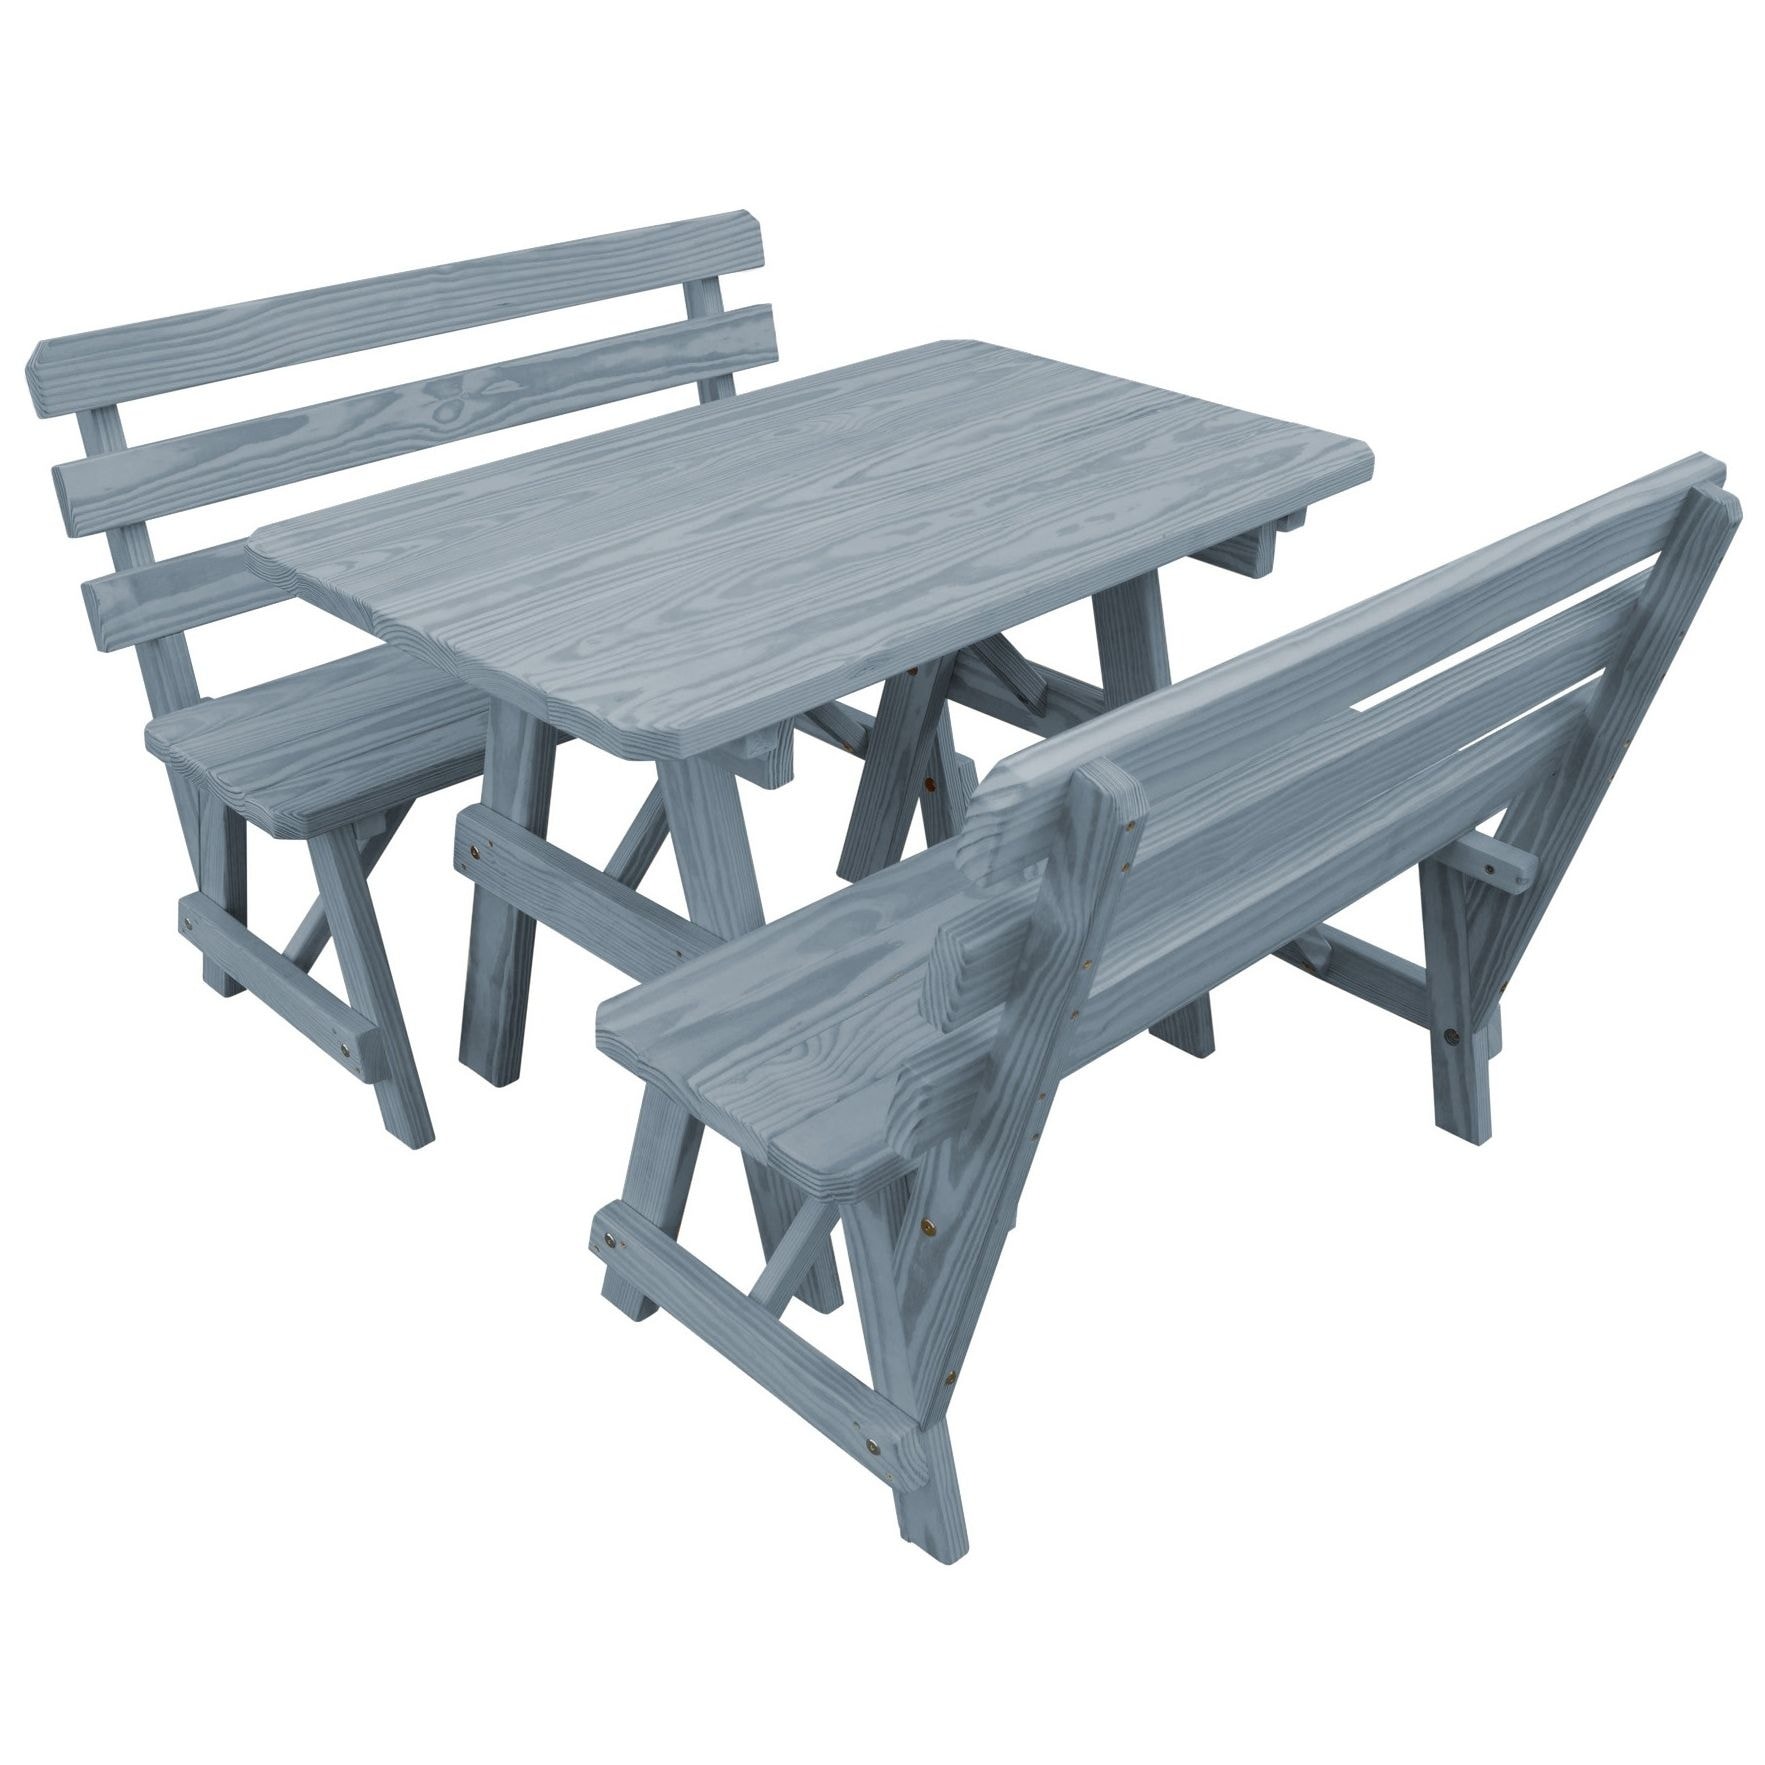 Pine 4 Picnic Table With 2 Backed Benches